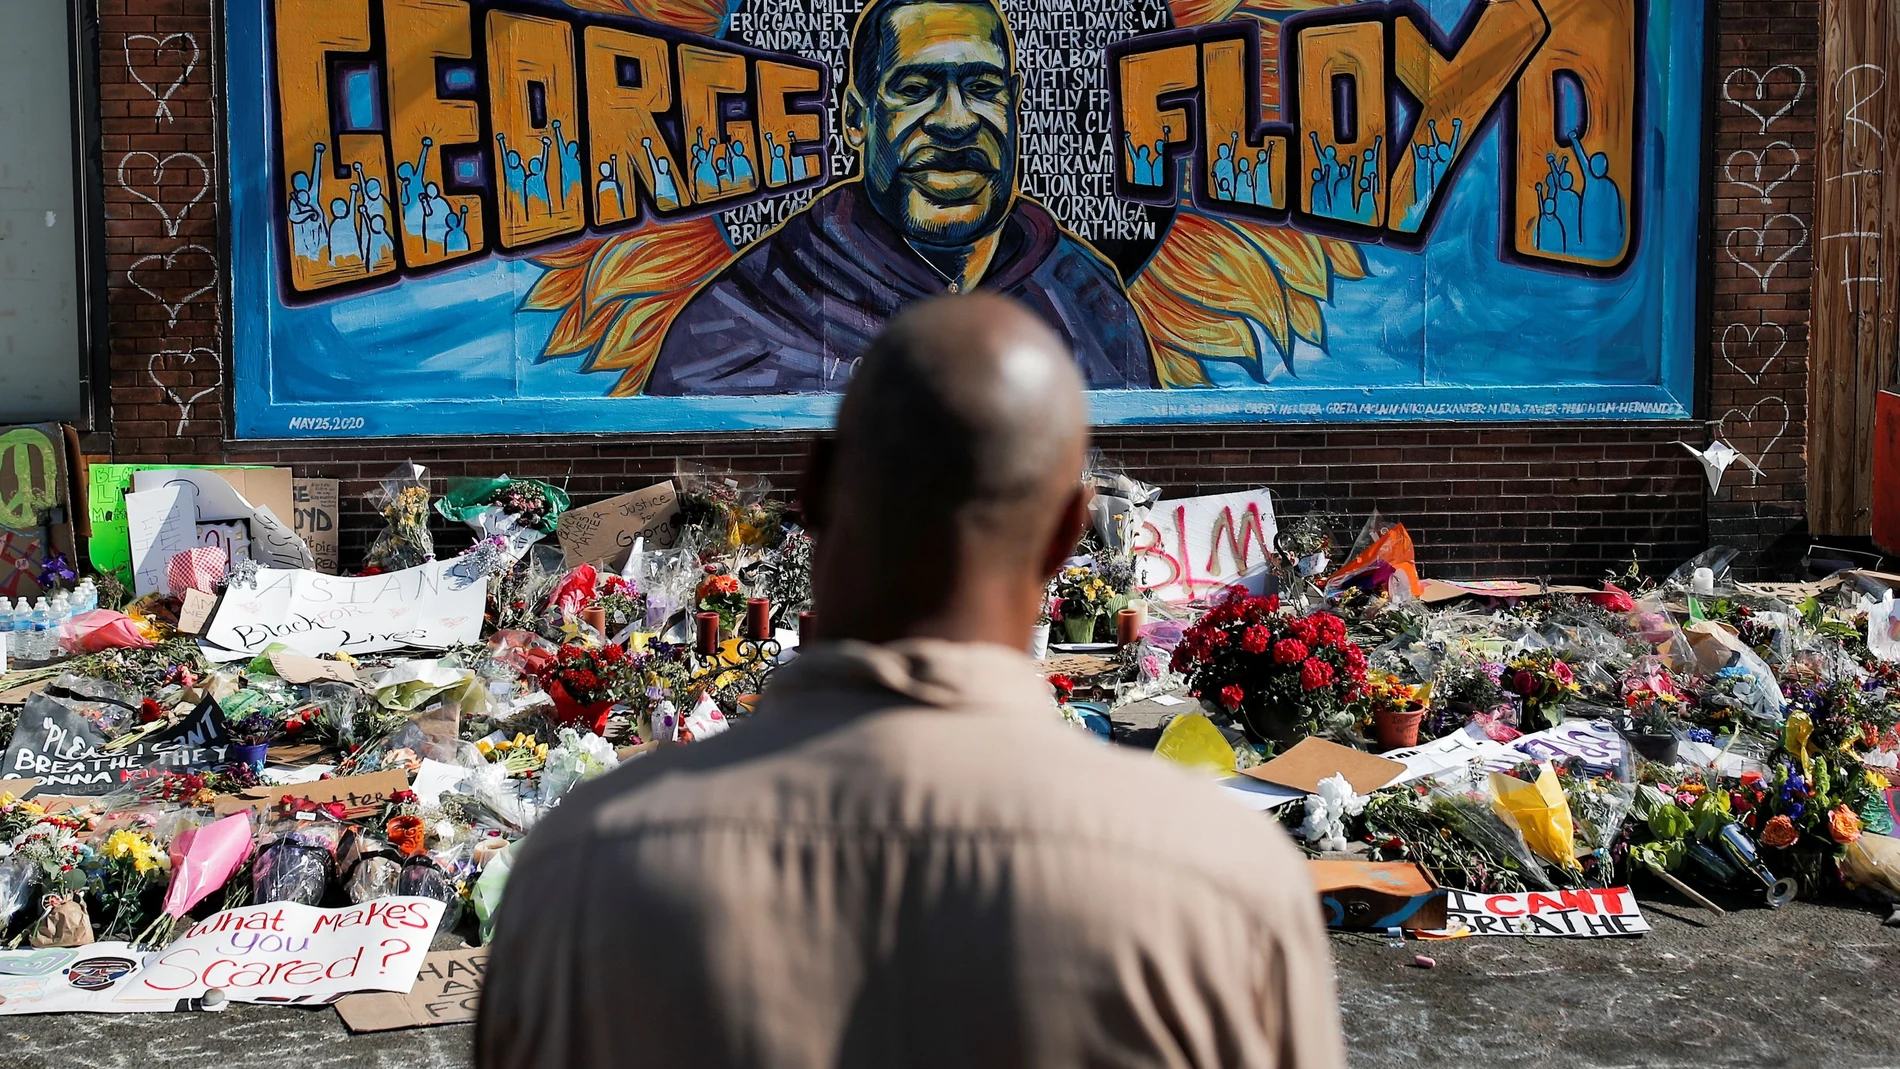 A local resident stands in front of a makeshift memorial honoring George Floyd, at the spot where he was taken into custody, in Minneapolis, Minnesota, U.S., June 1, 2020. REUTERS/Carlos Barria